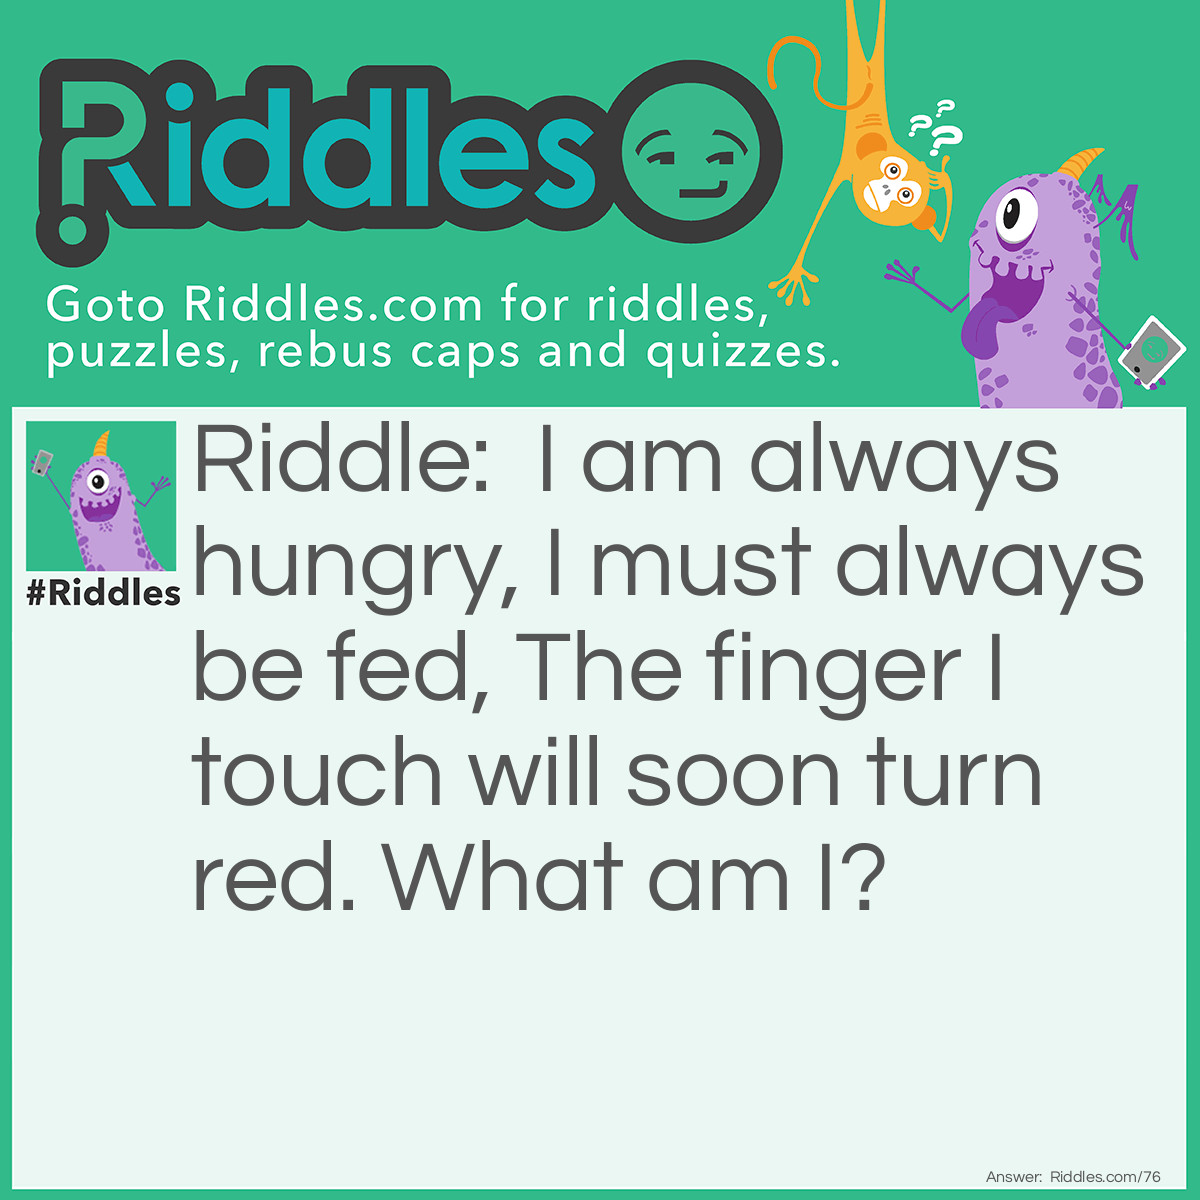 Riddle: I am always hungry, I must always be fed, The finger I touch will soon turn red. What am I? Answer: I am fire.